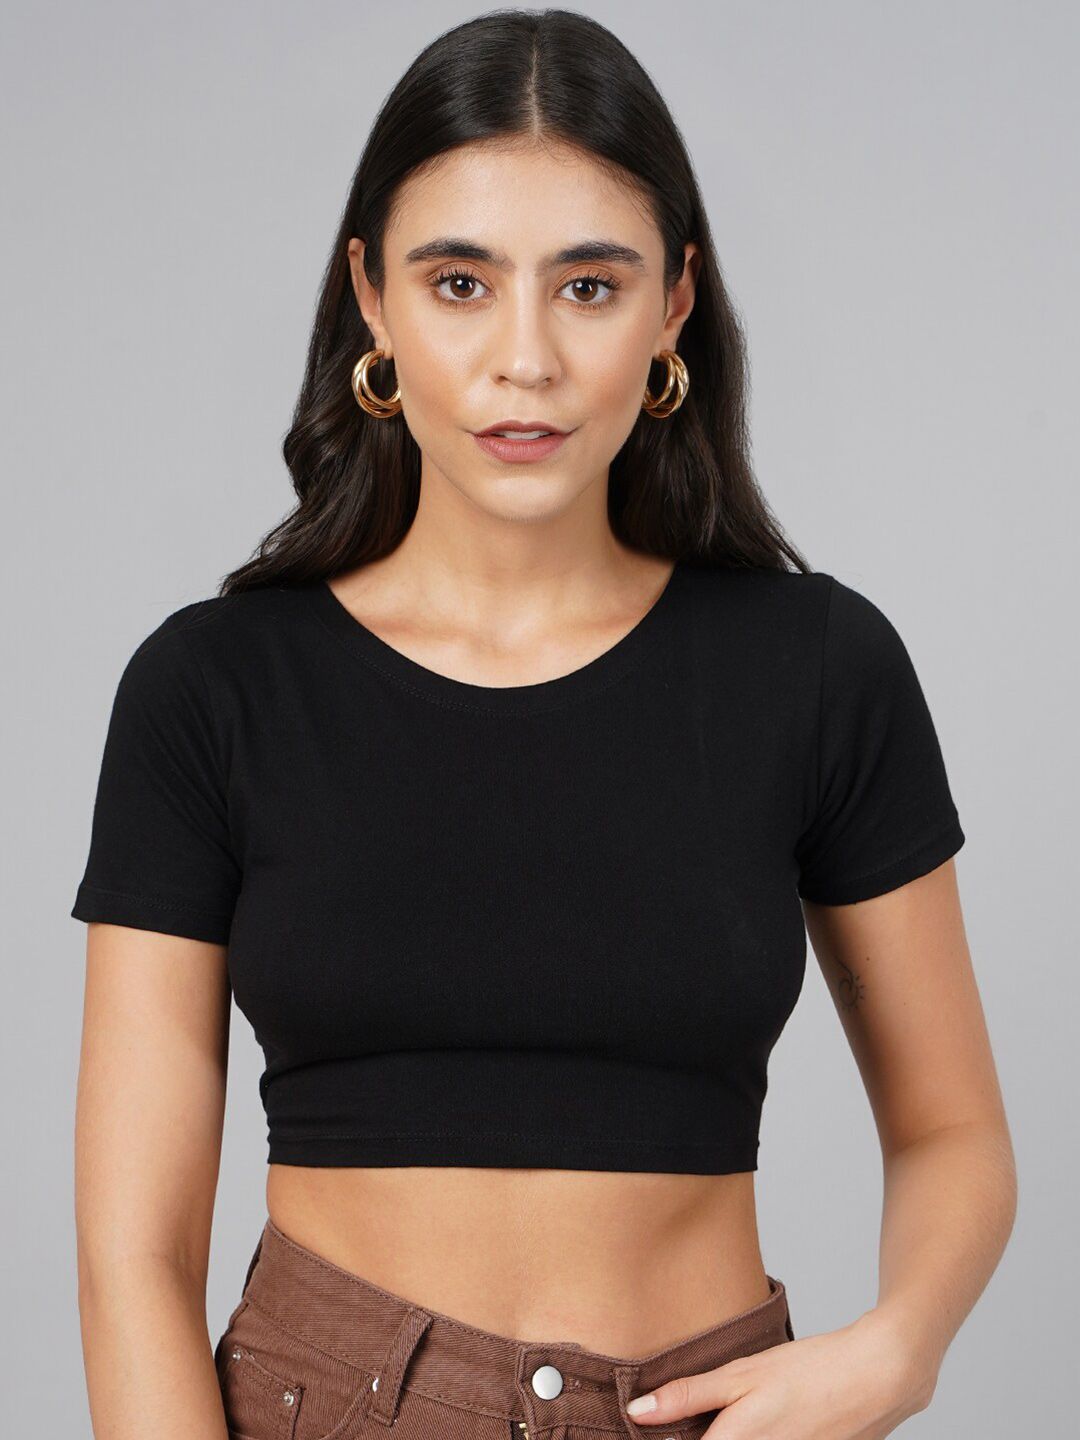 SCORPIUS Black Solid Short Sleeve Styled Back Crop Top Price in India